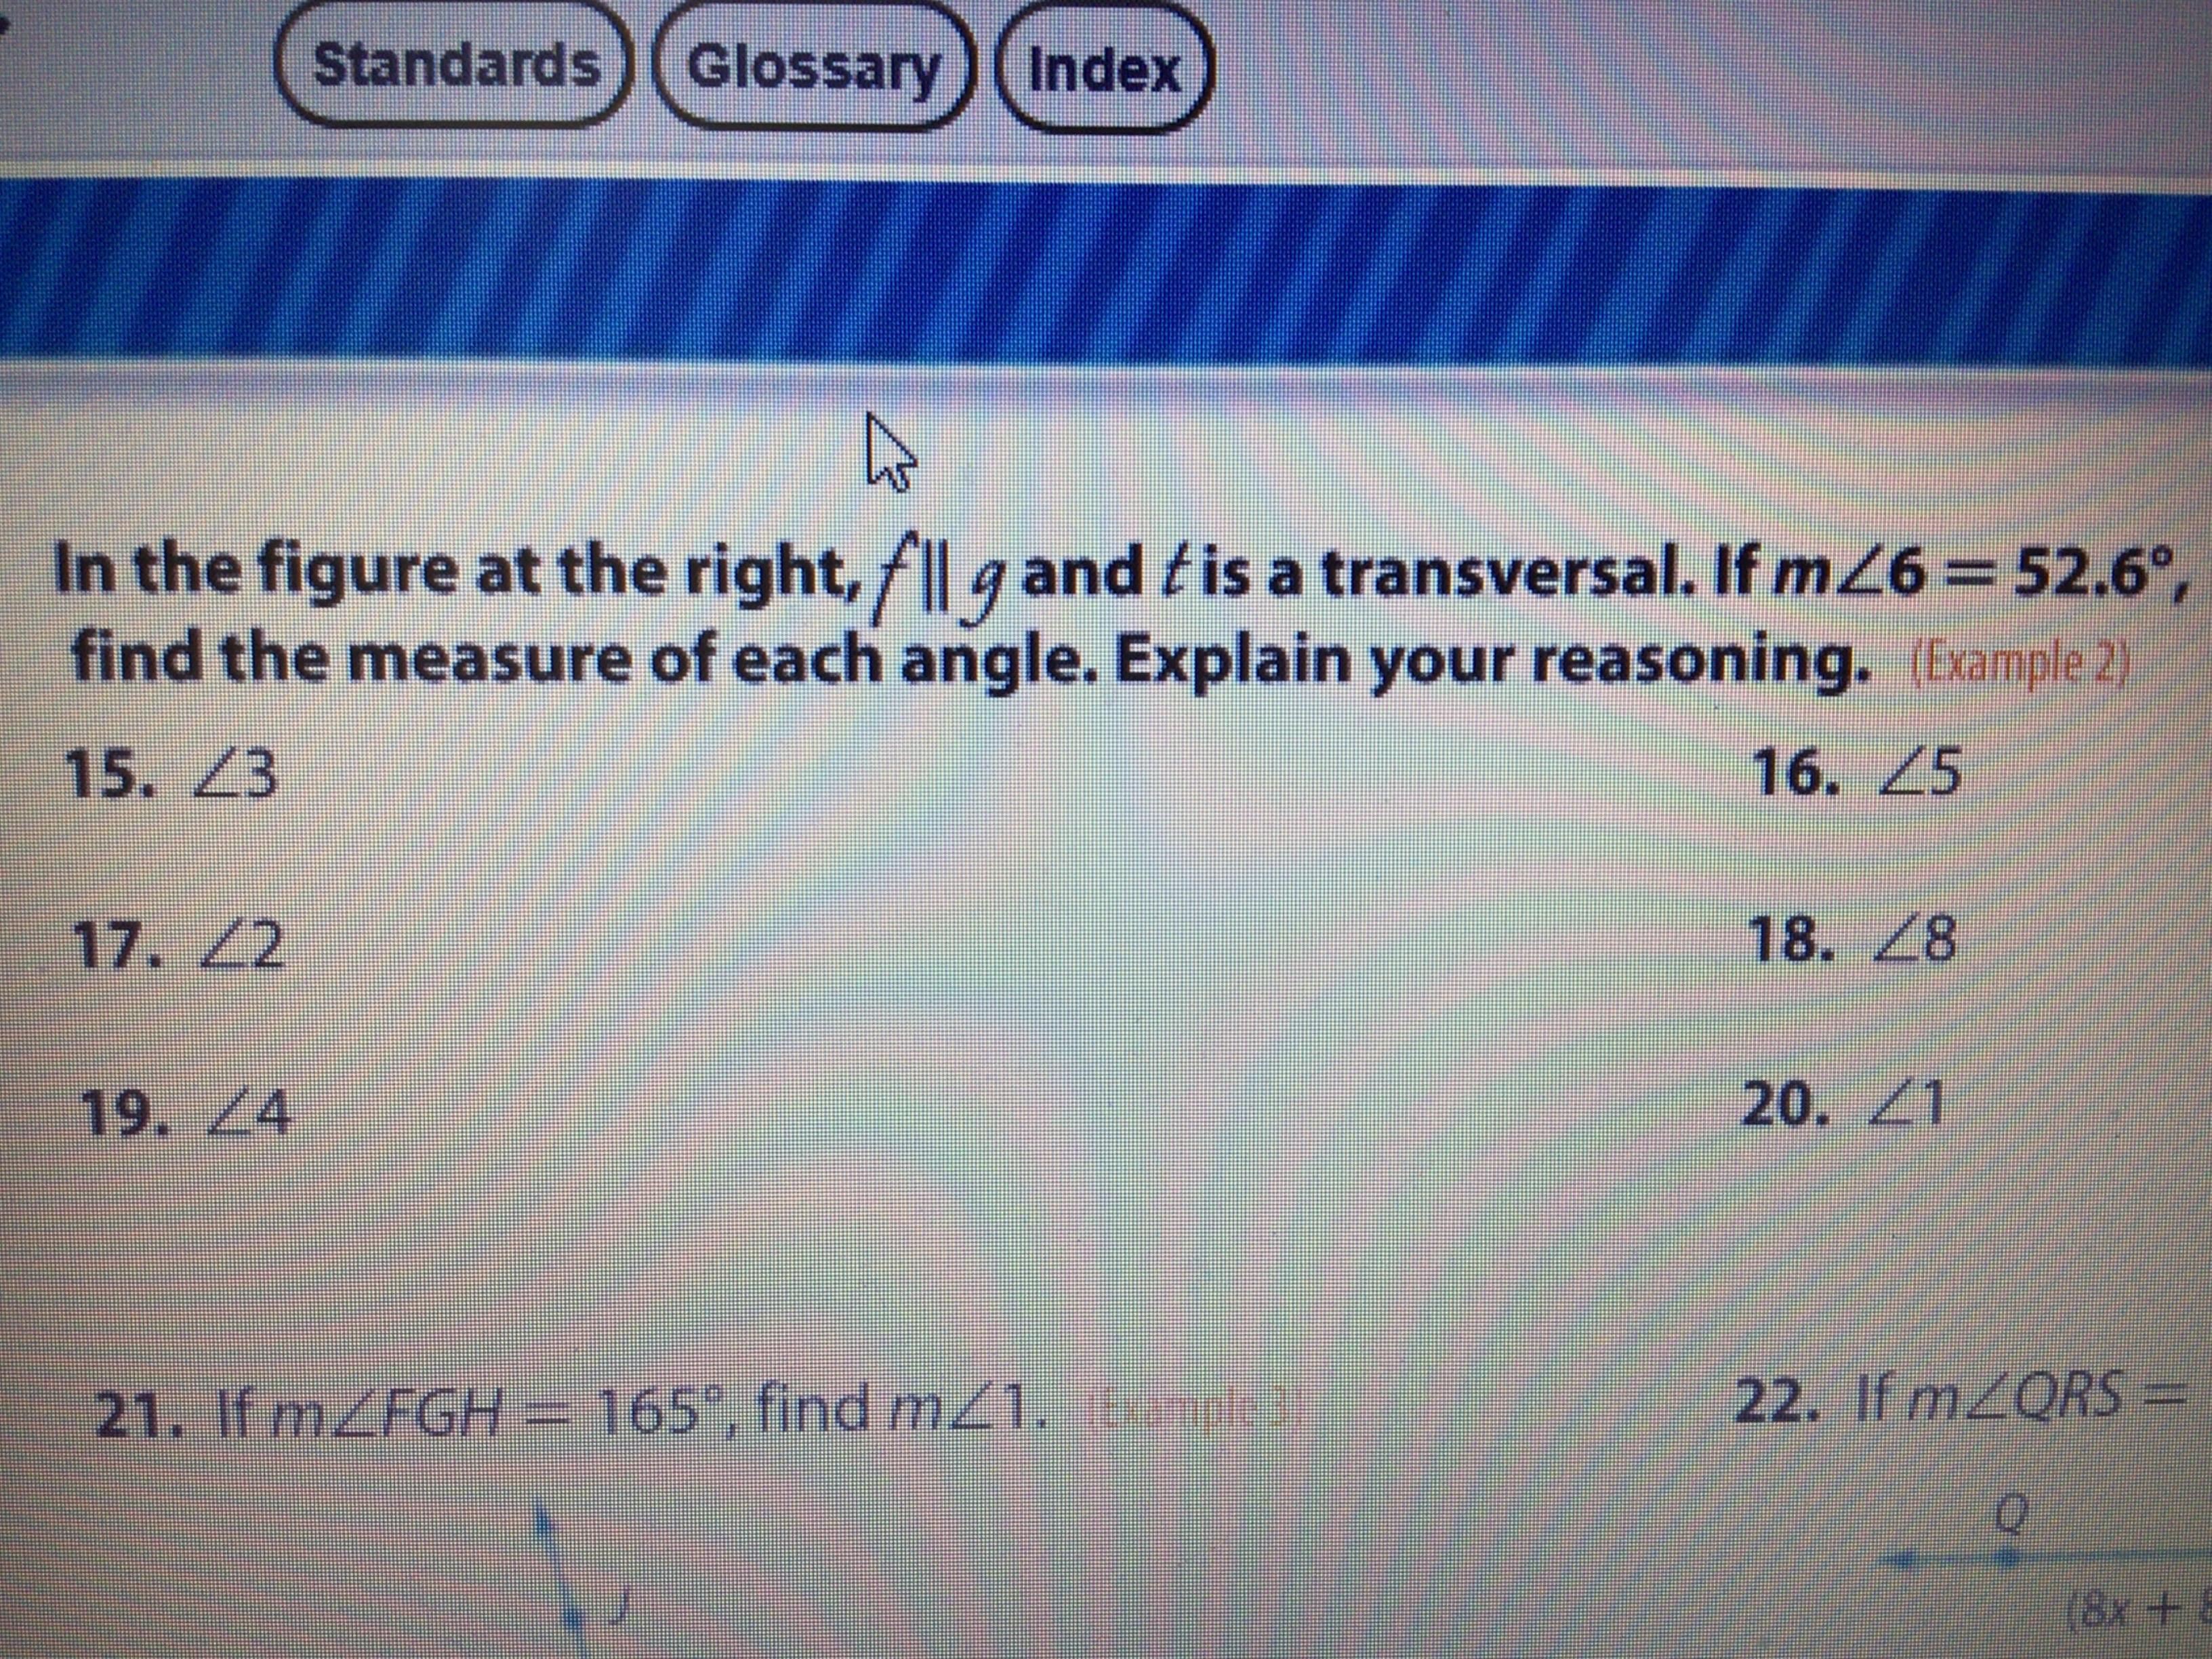 Please Help! I Need Help With #16, 18, And 20. You Can Ignore Everything Else. I Will Give Brainliest!